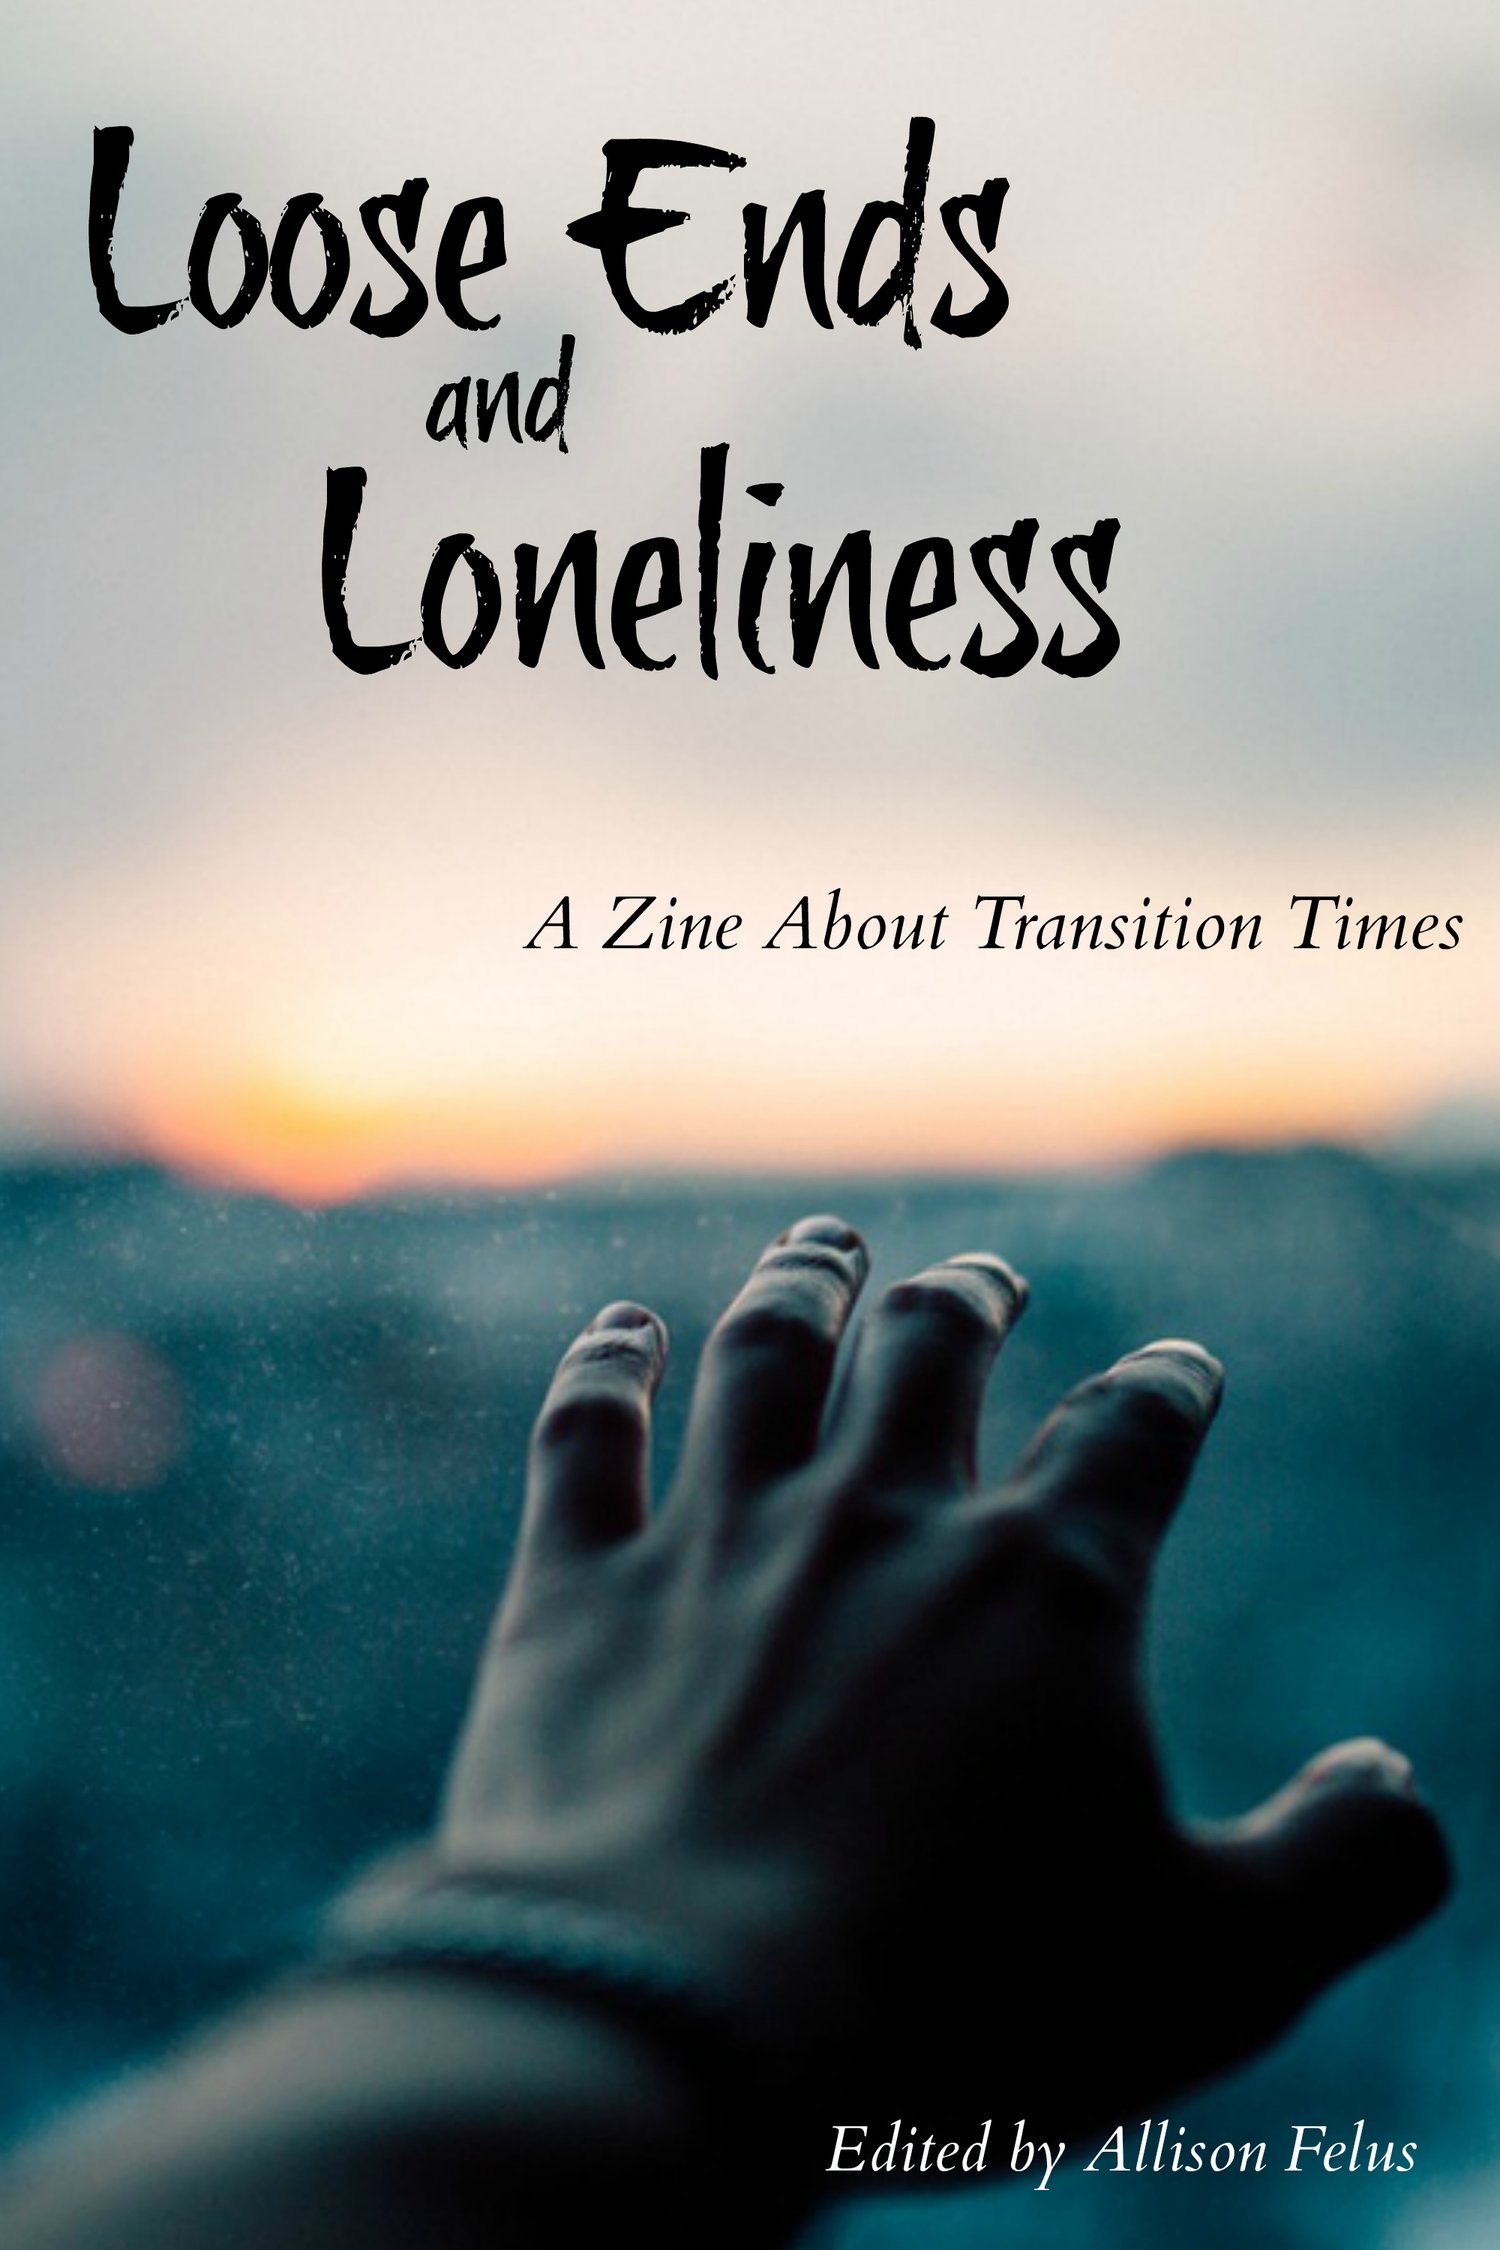 Image of Loose Ends and Loneliness